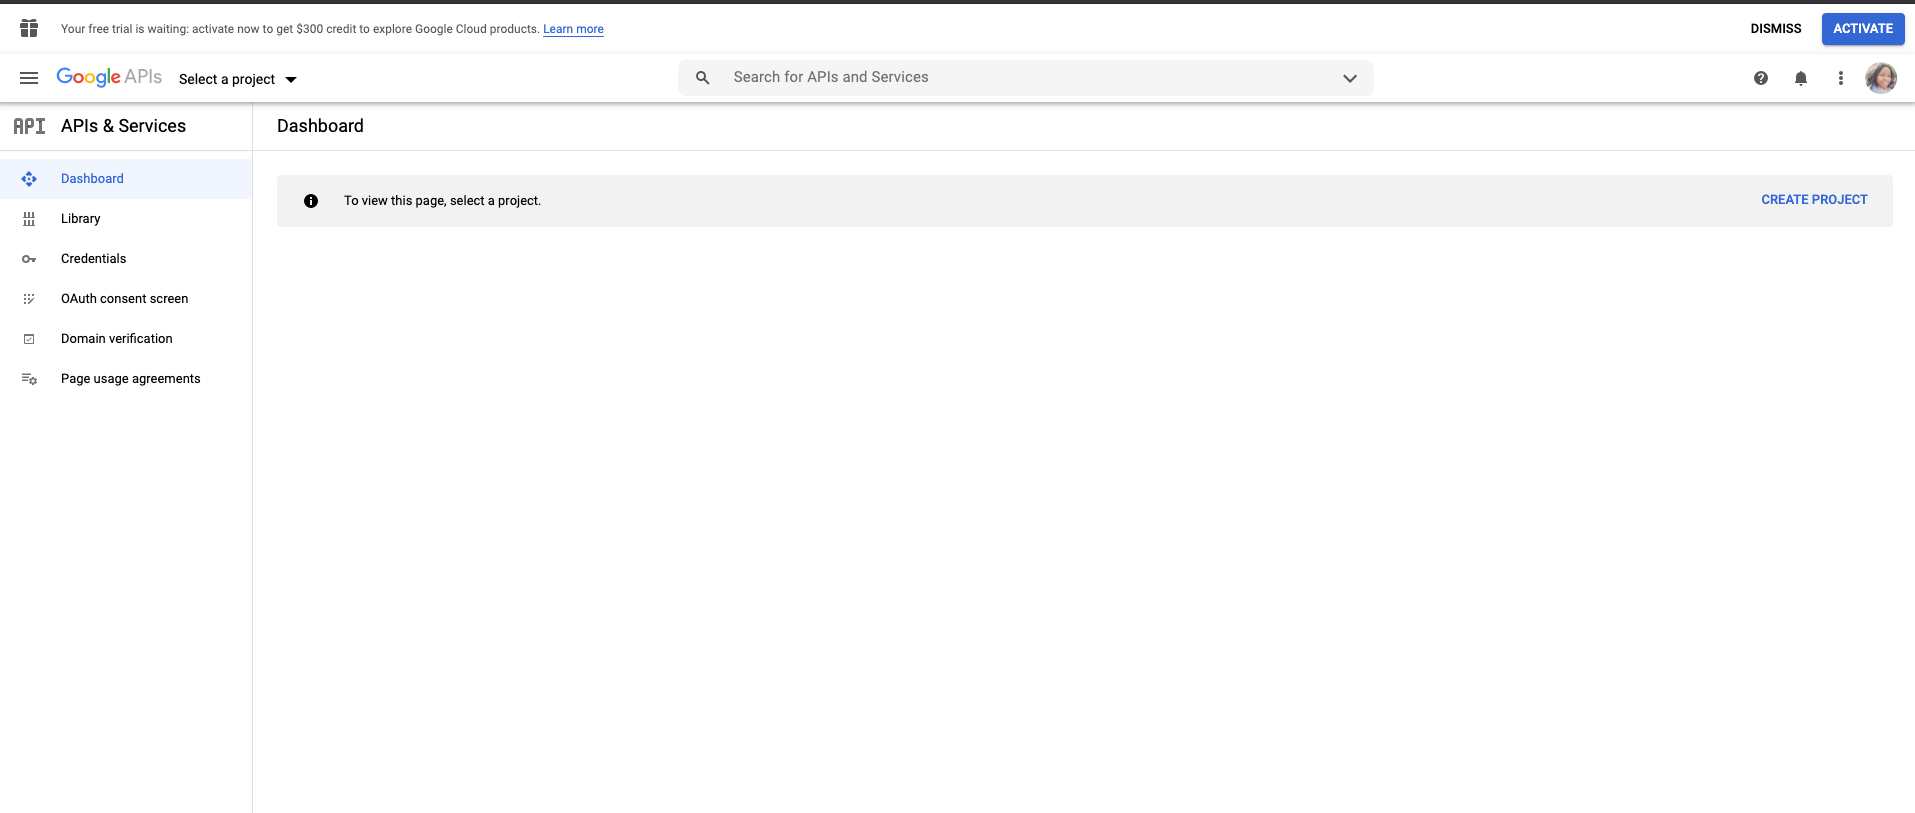 Head over to Google developer console and click on “Create Project”